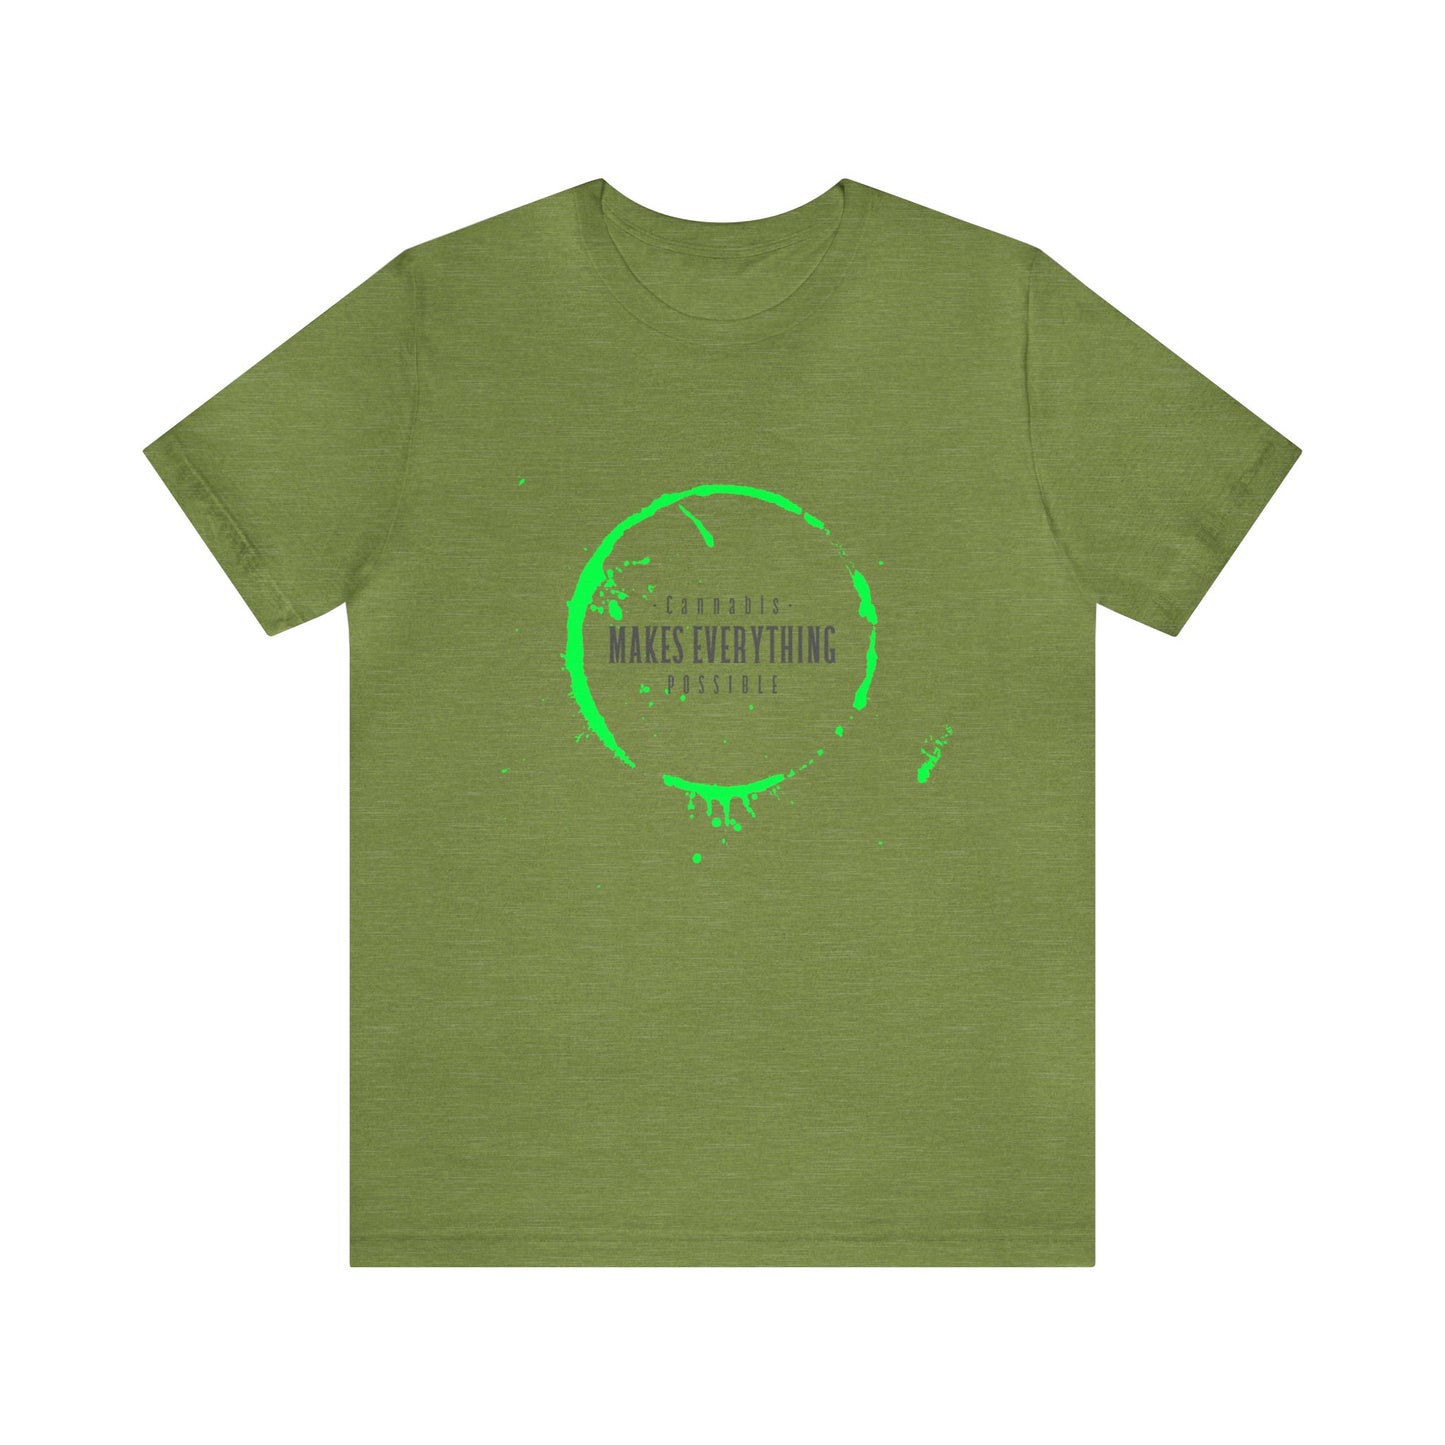 Cannabis Makes Everything Possible Unisex Tee